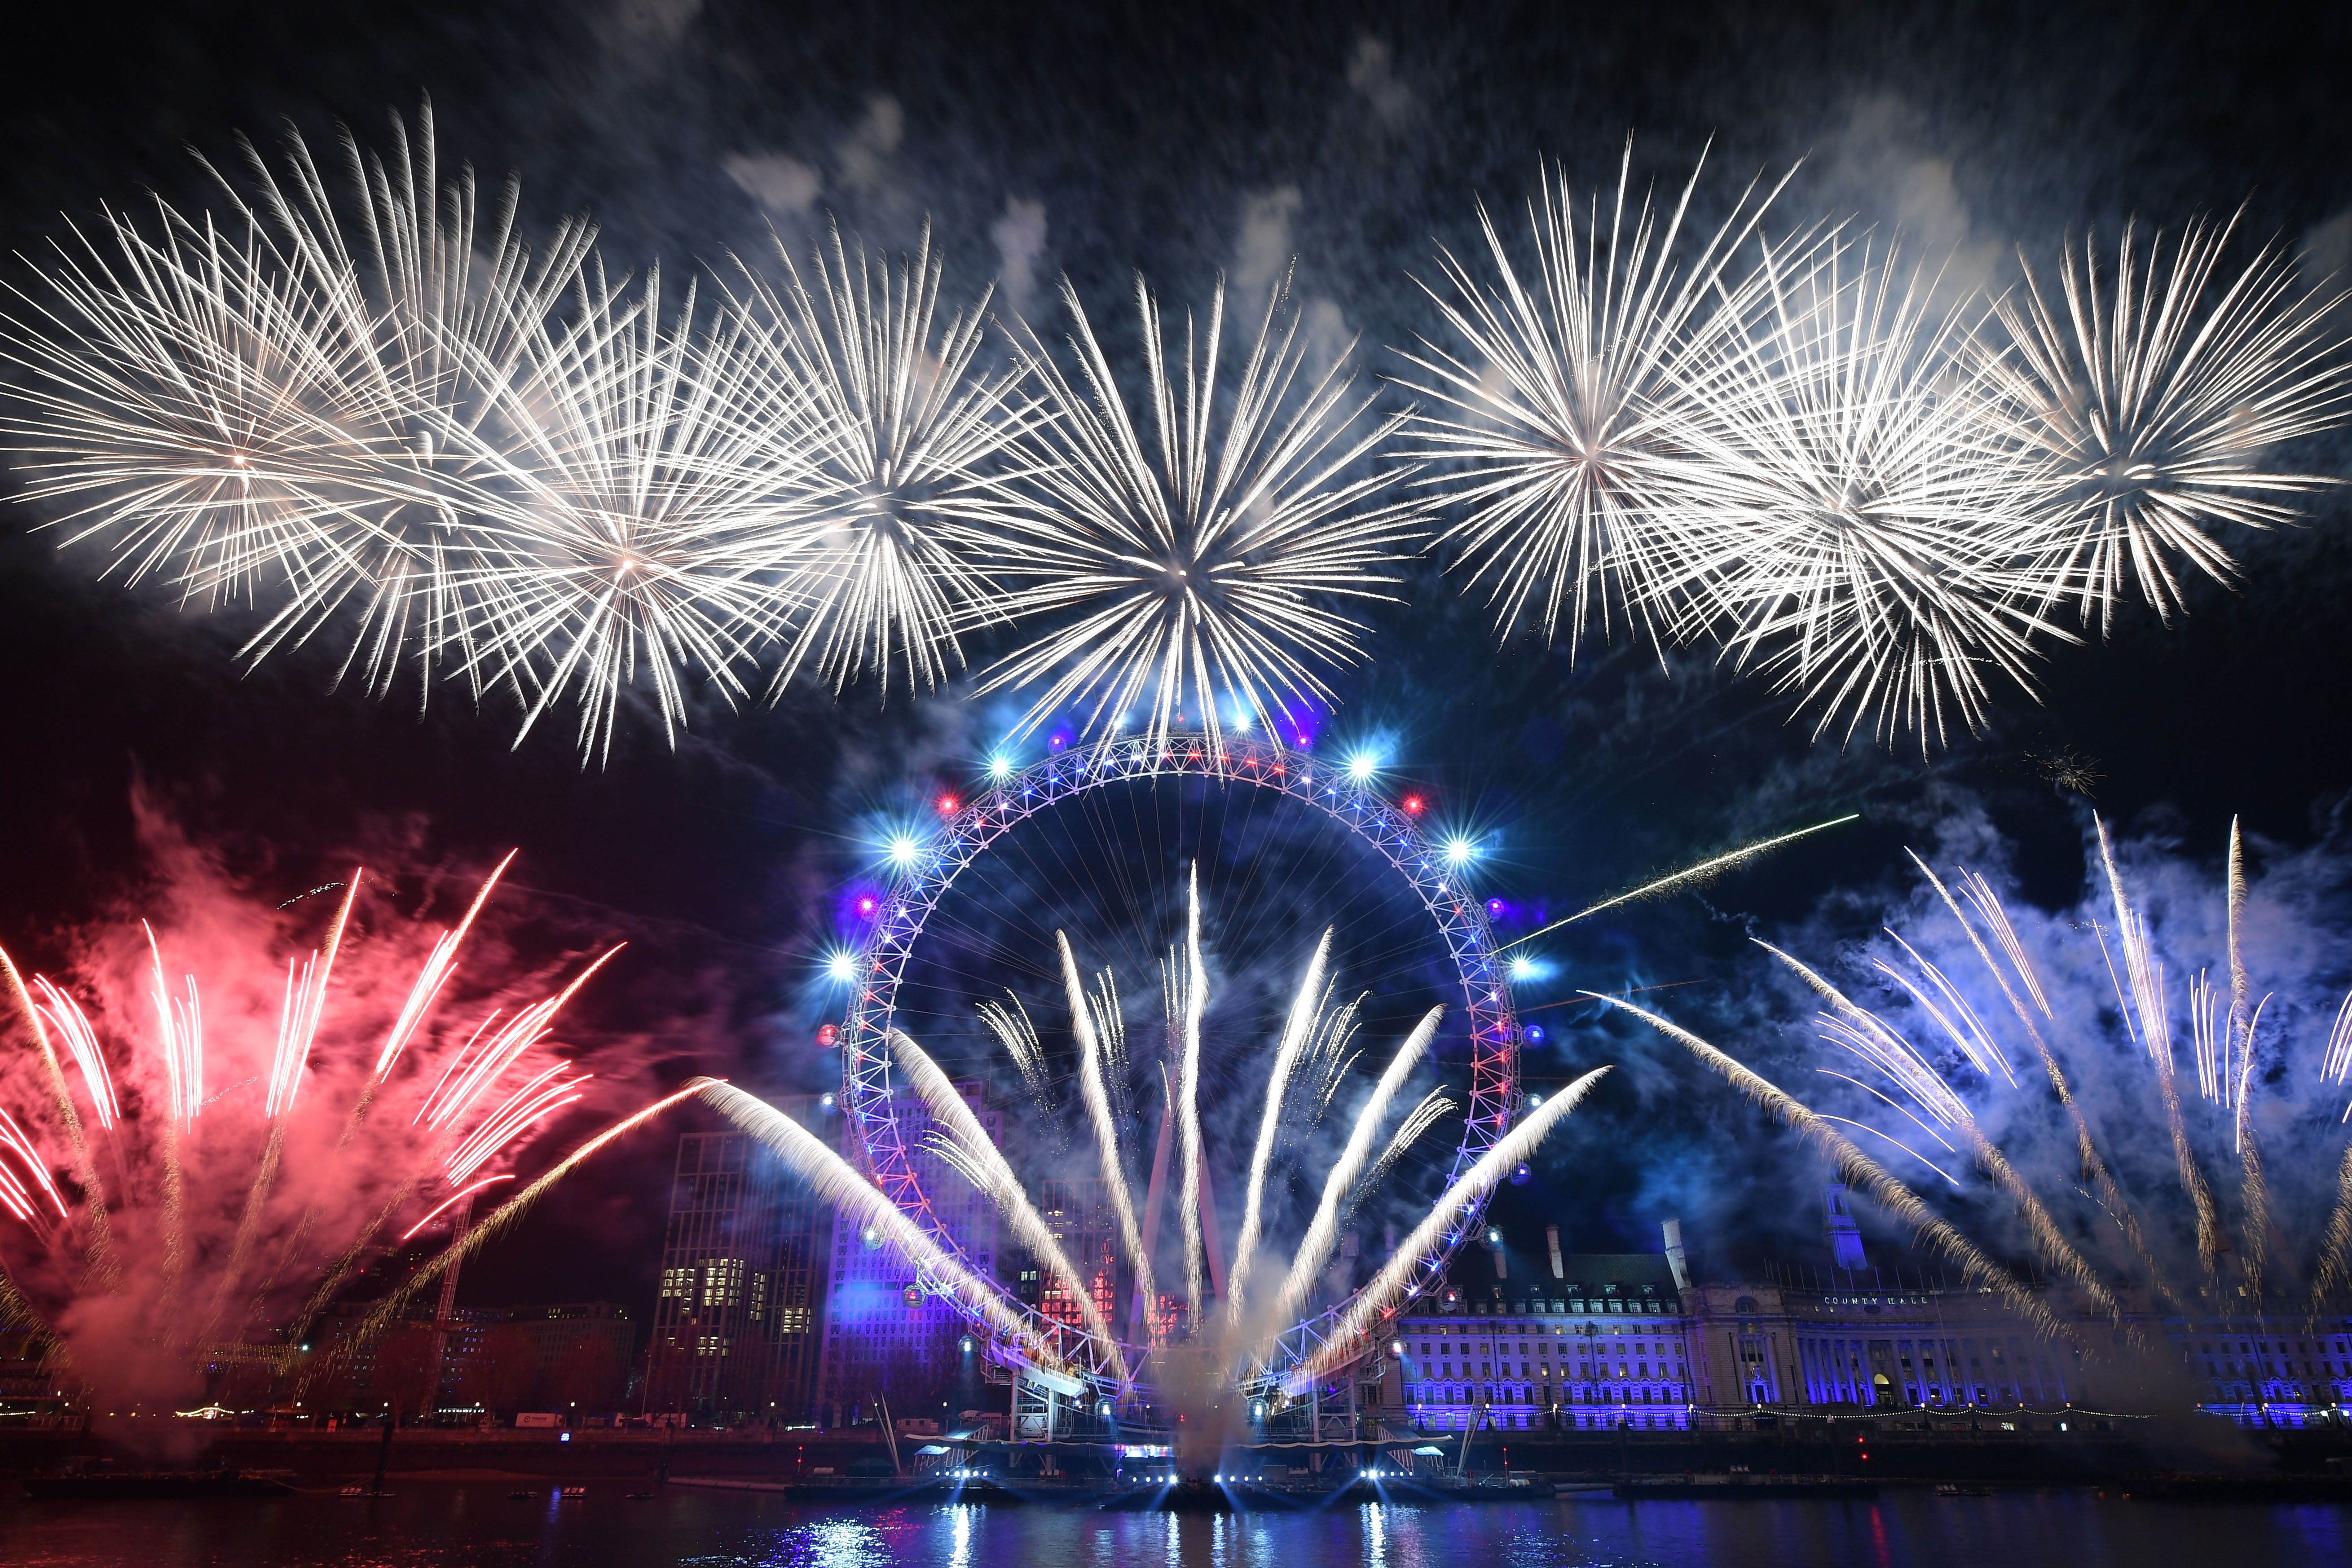 Fireworks explode around the London Eye during New Year's celebrations in central London just after midnight on January 1, 2020.